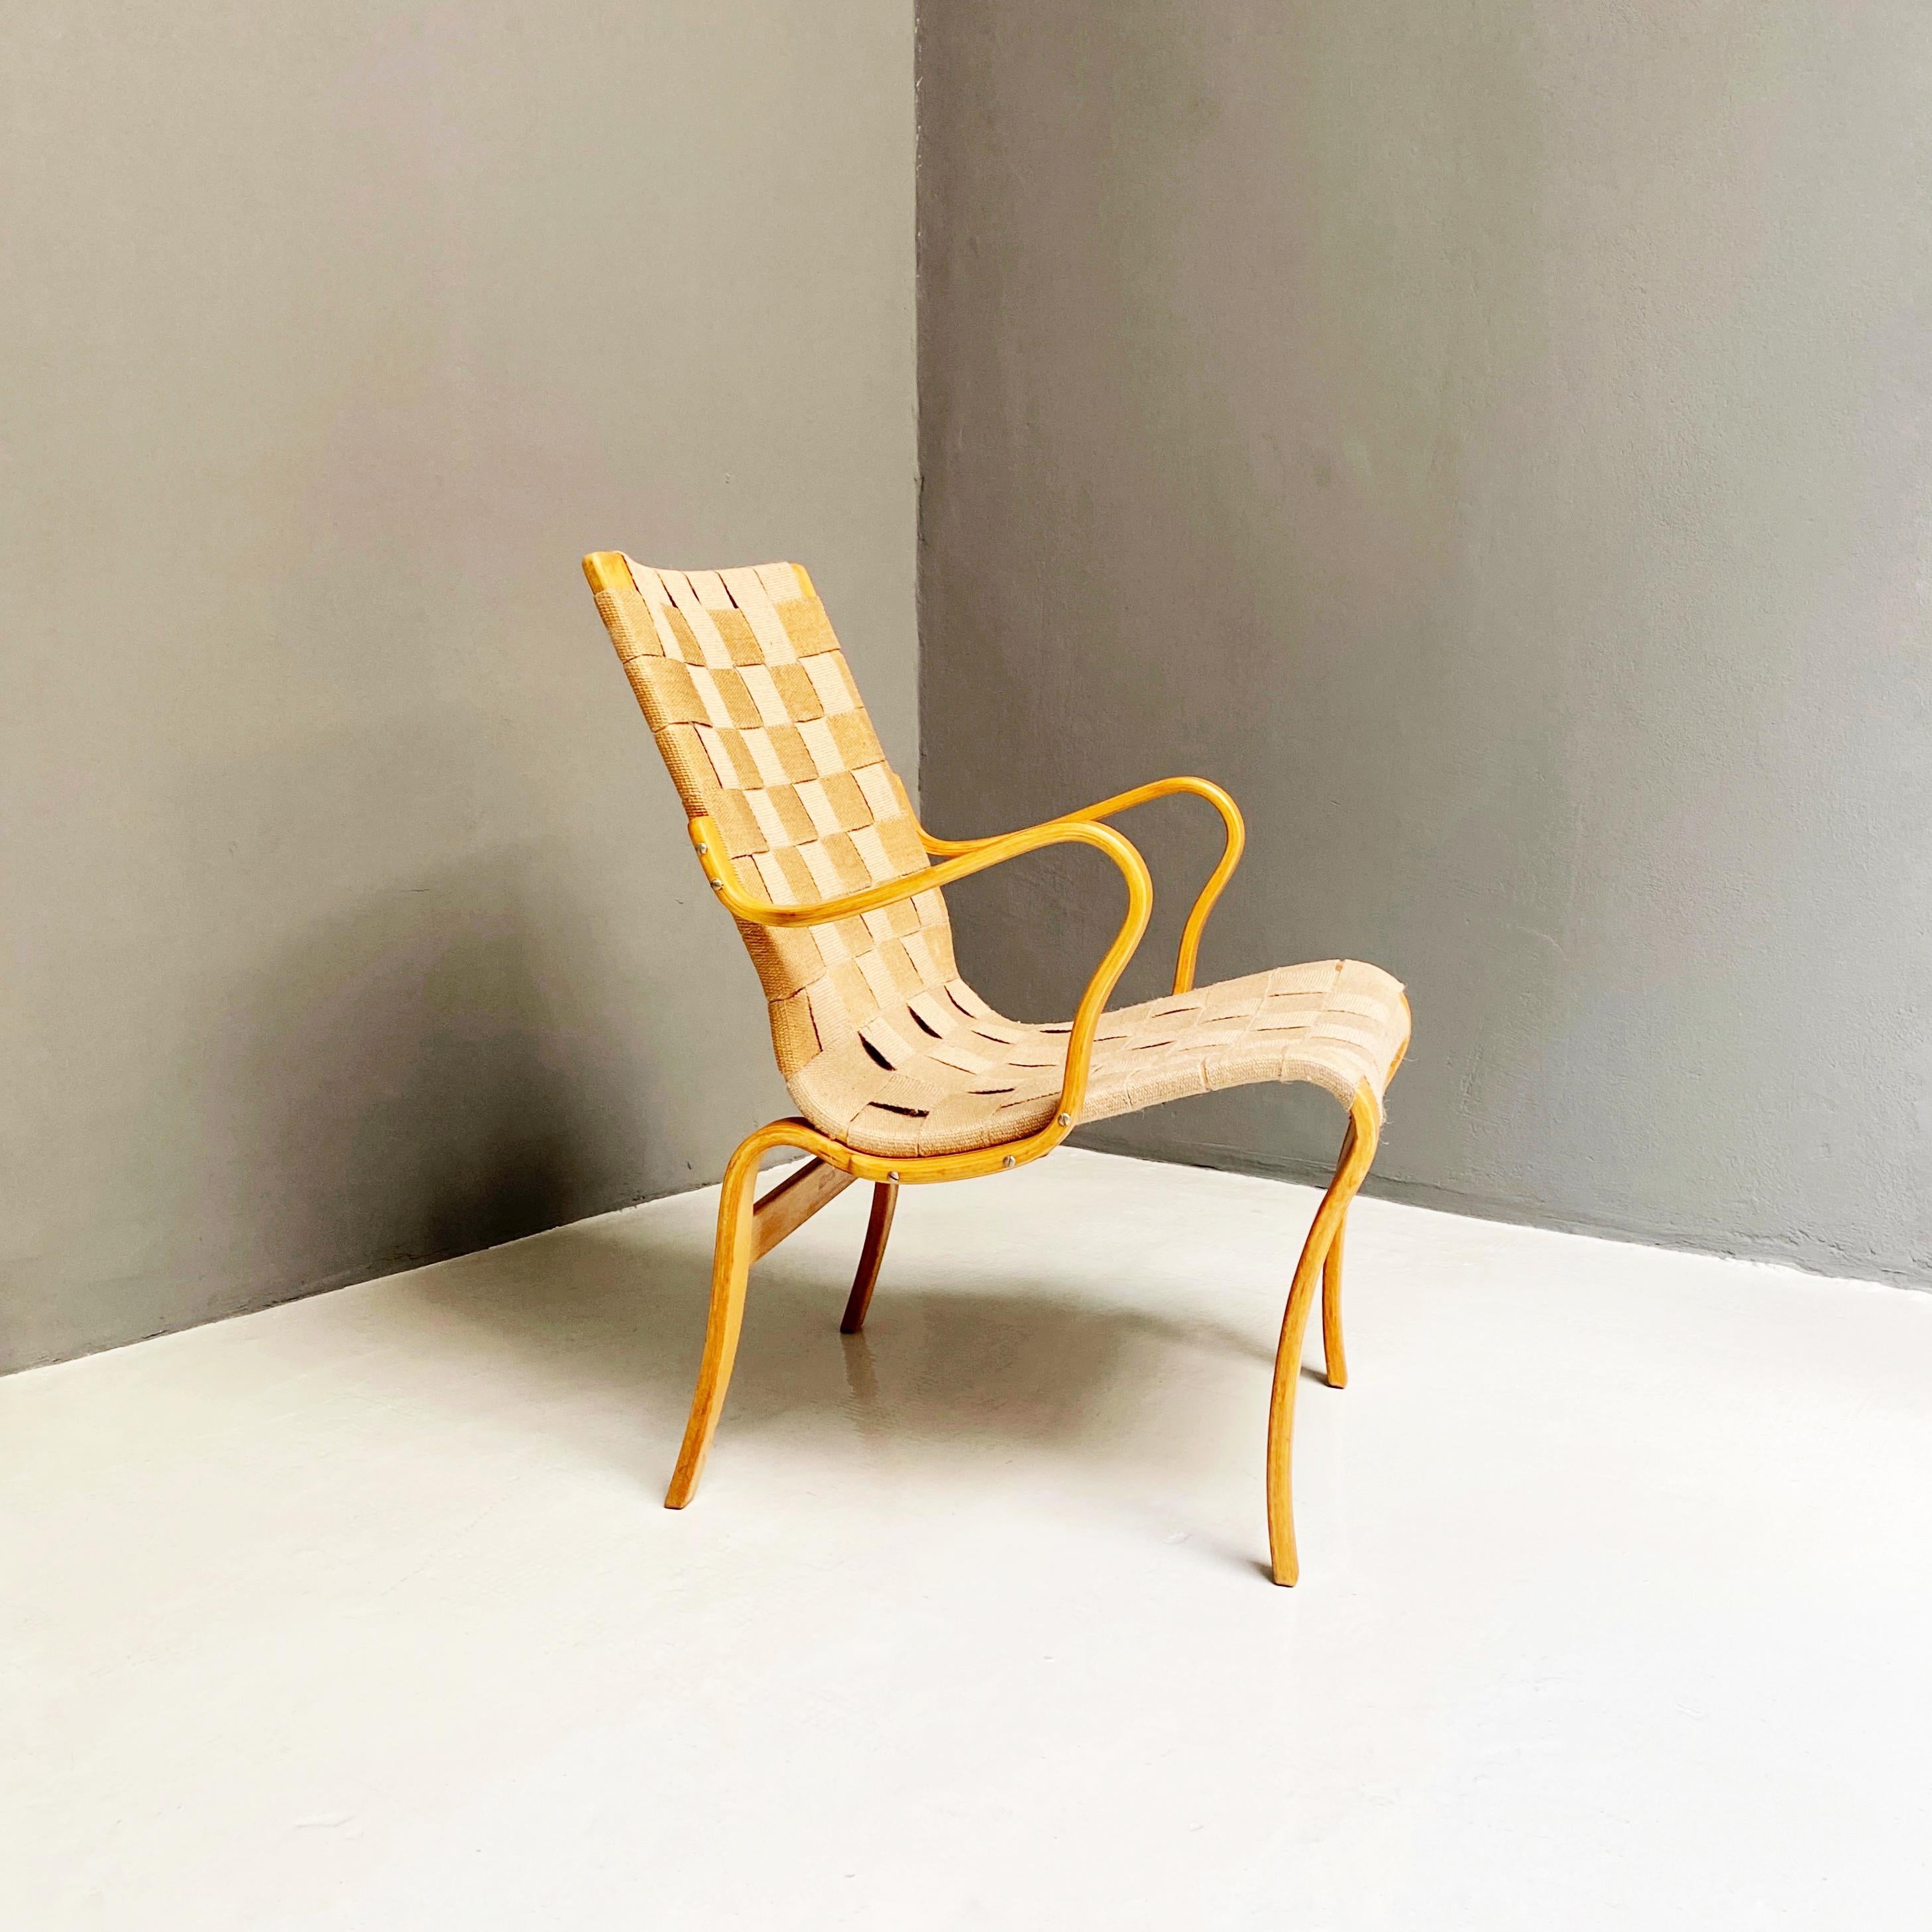 Eva chair by Bruno Mathsson for Firma Karl Mathsson, 1977
Eva chair with armrests in birch wood with curved structure and seat with woven fabric. Designed by Bruno Mathsson for Firma Karl Mathsson. Designed 1970 to 1979.

Excellent condition,